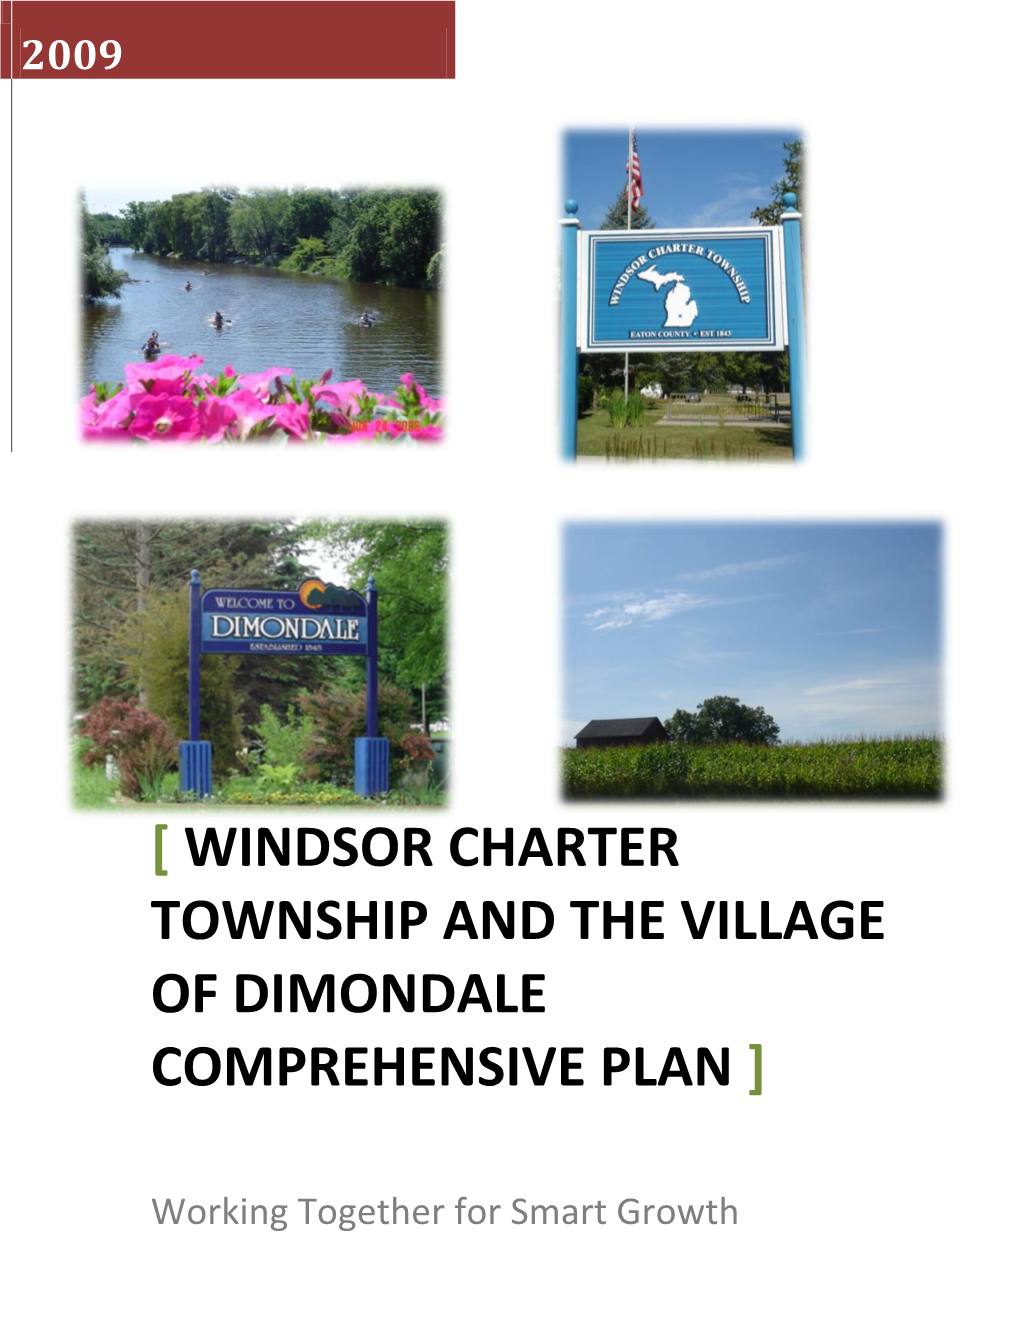 Township and the Village of Dimondale Comprehensive Plan 2009